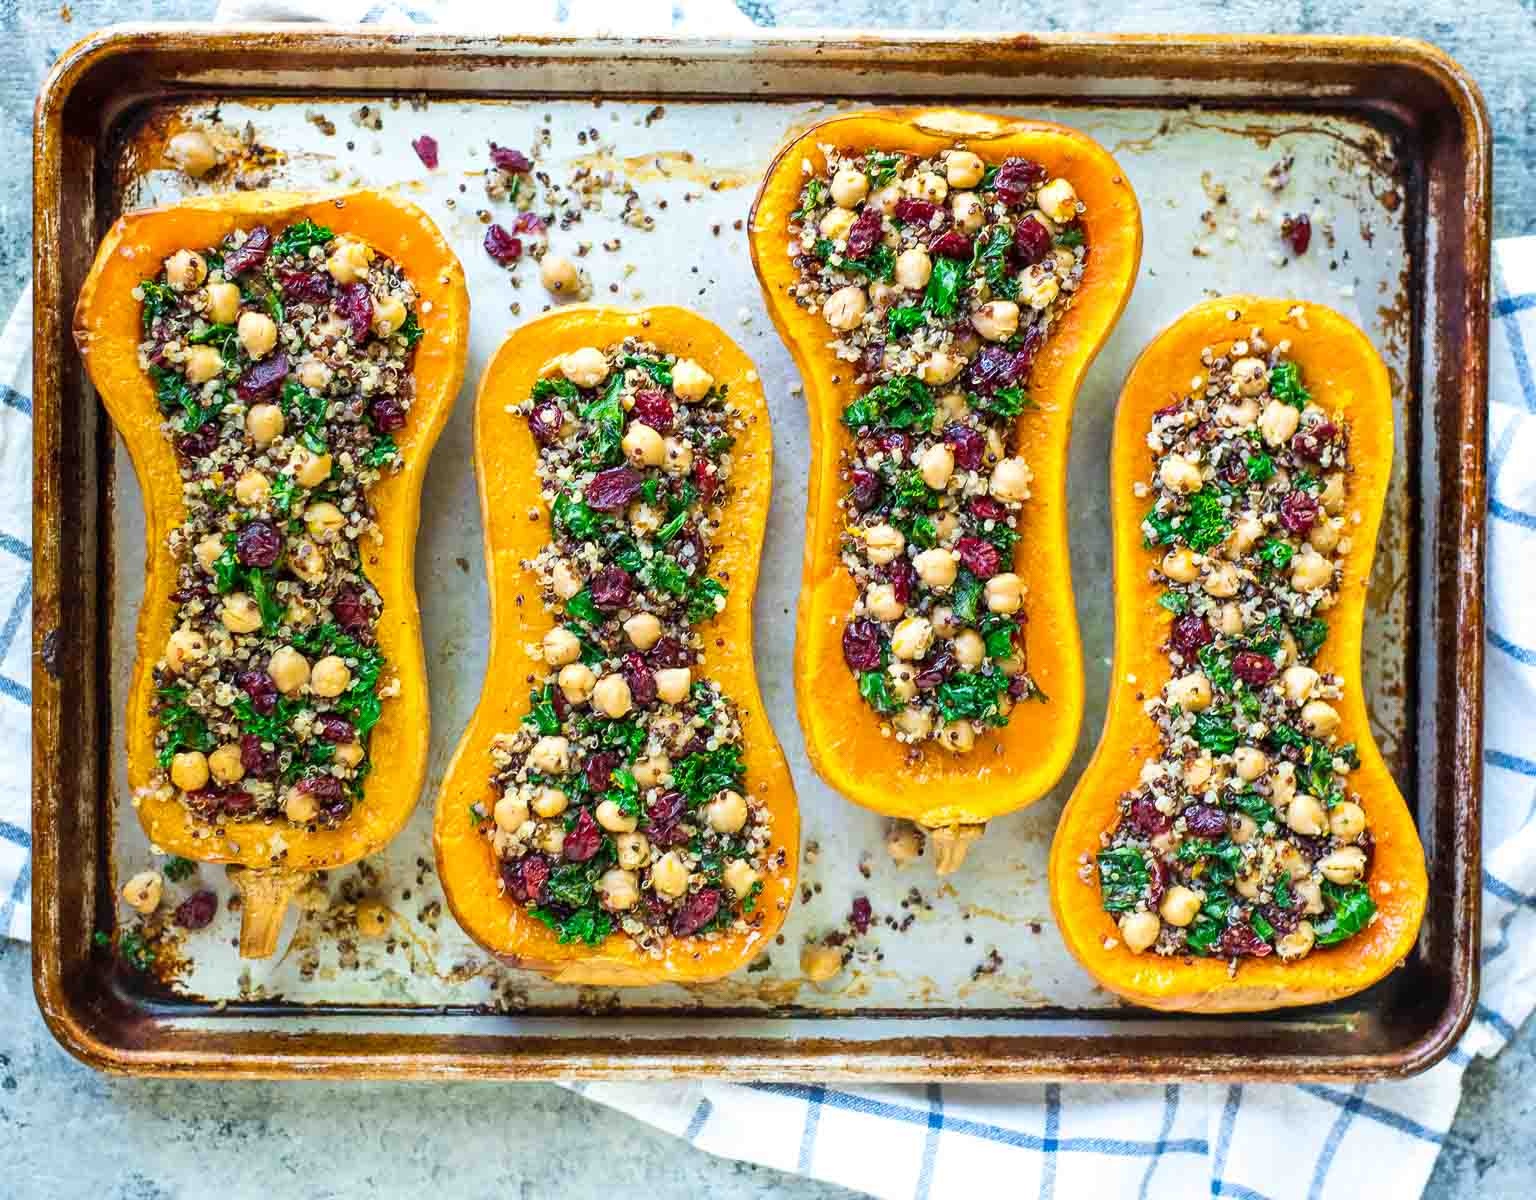 Stuffed Butternut Squash with Quinoa, Cranberries, Kale, and Chickpeas